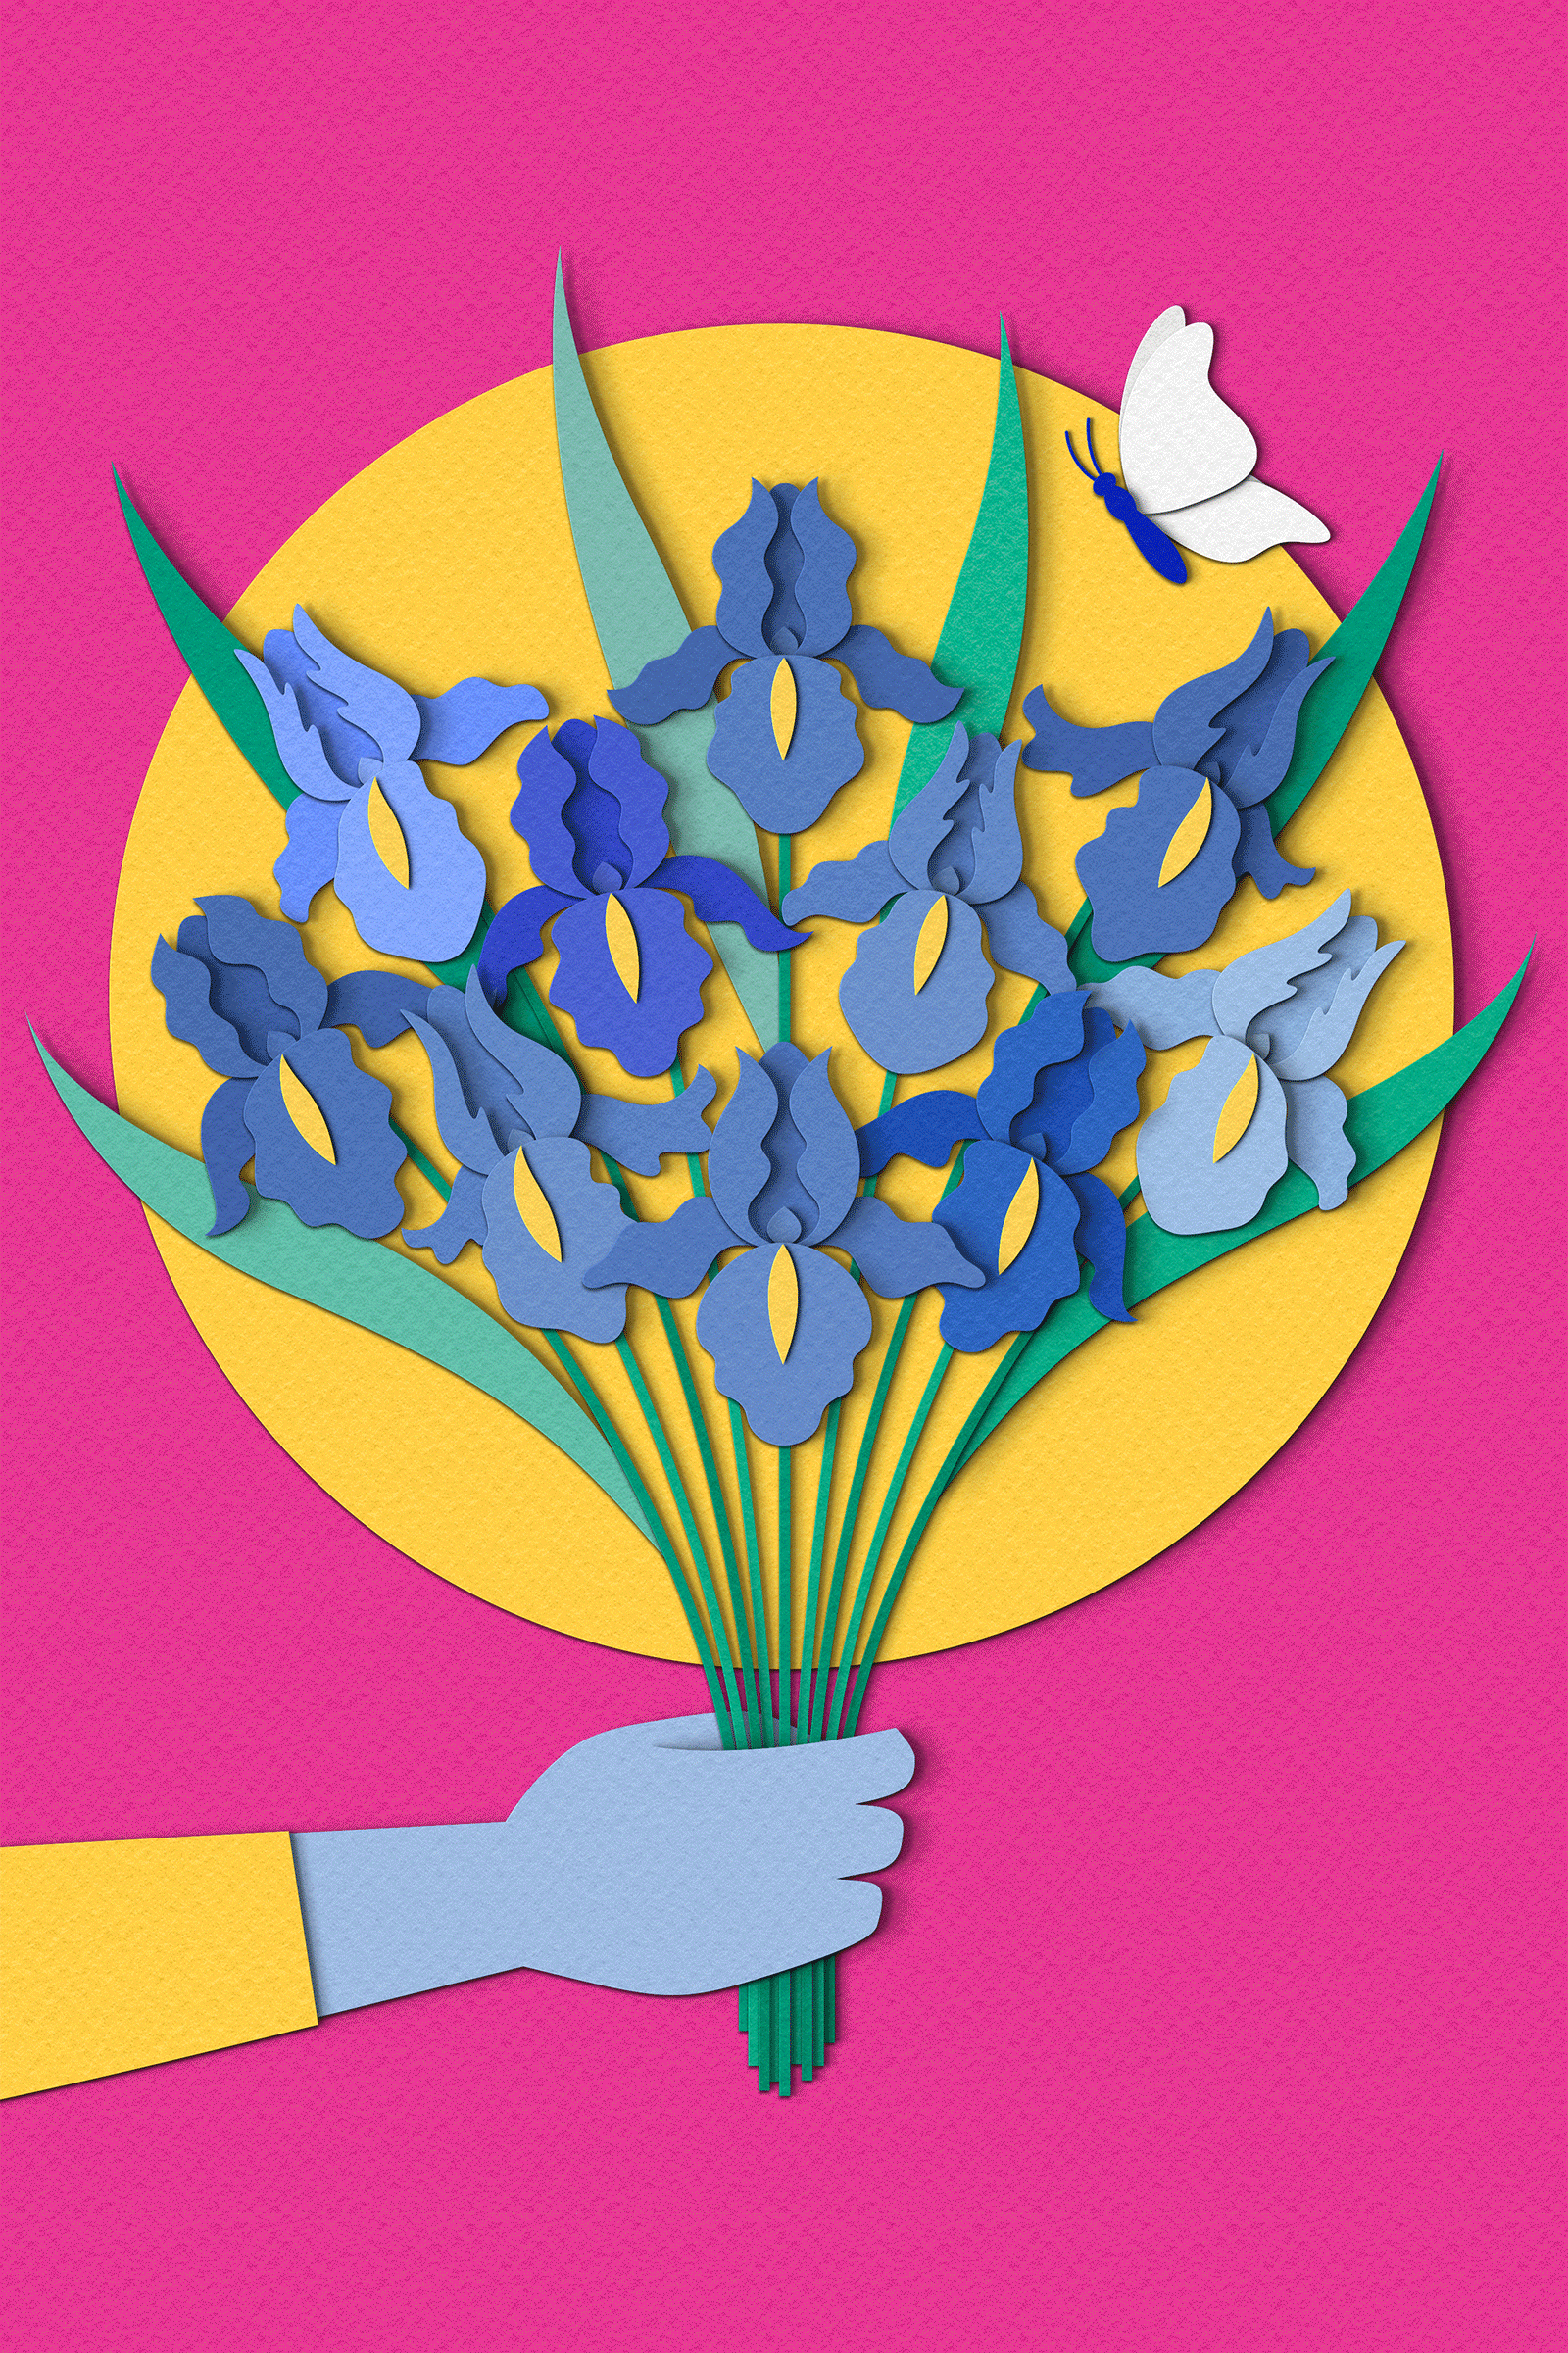 Getty25 - The Getty Center Anniversary bouquet bunch butterfly flowers getty illustration iris irises paper craft papercut pink poster